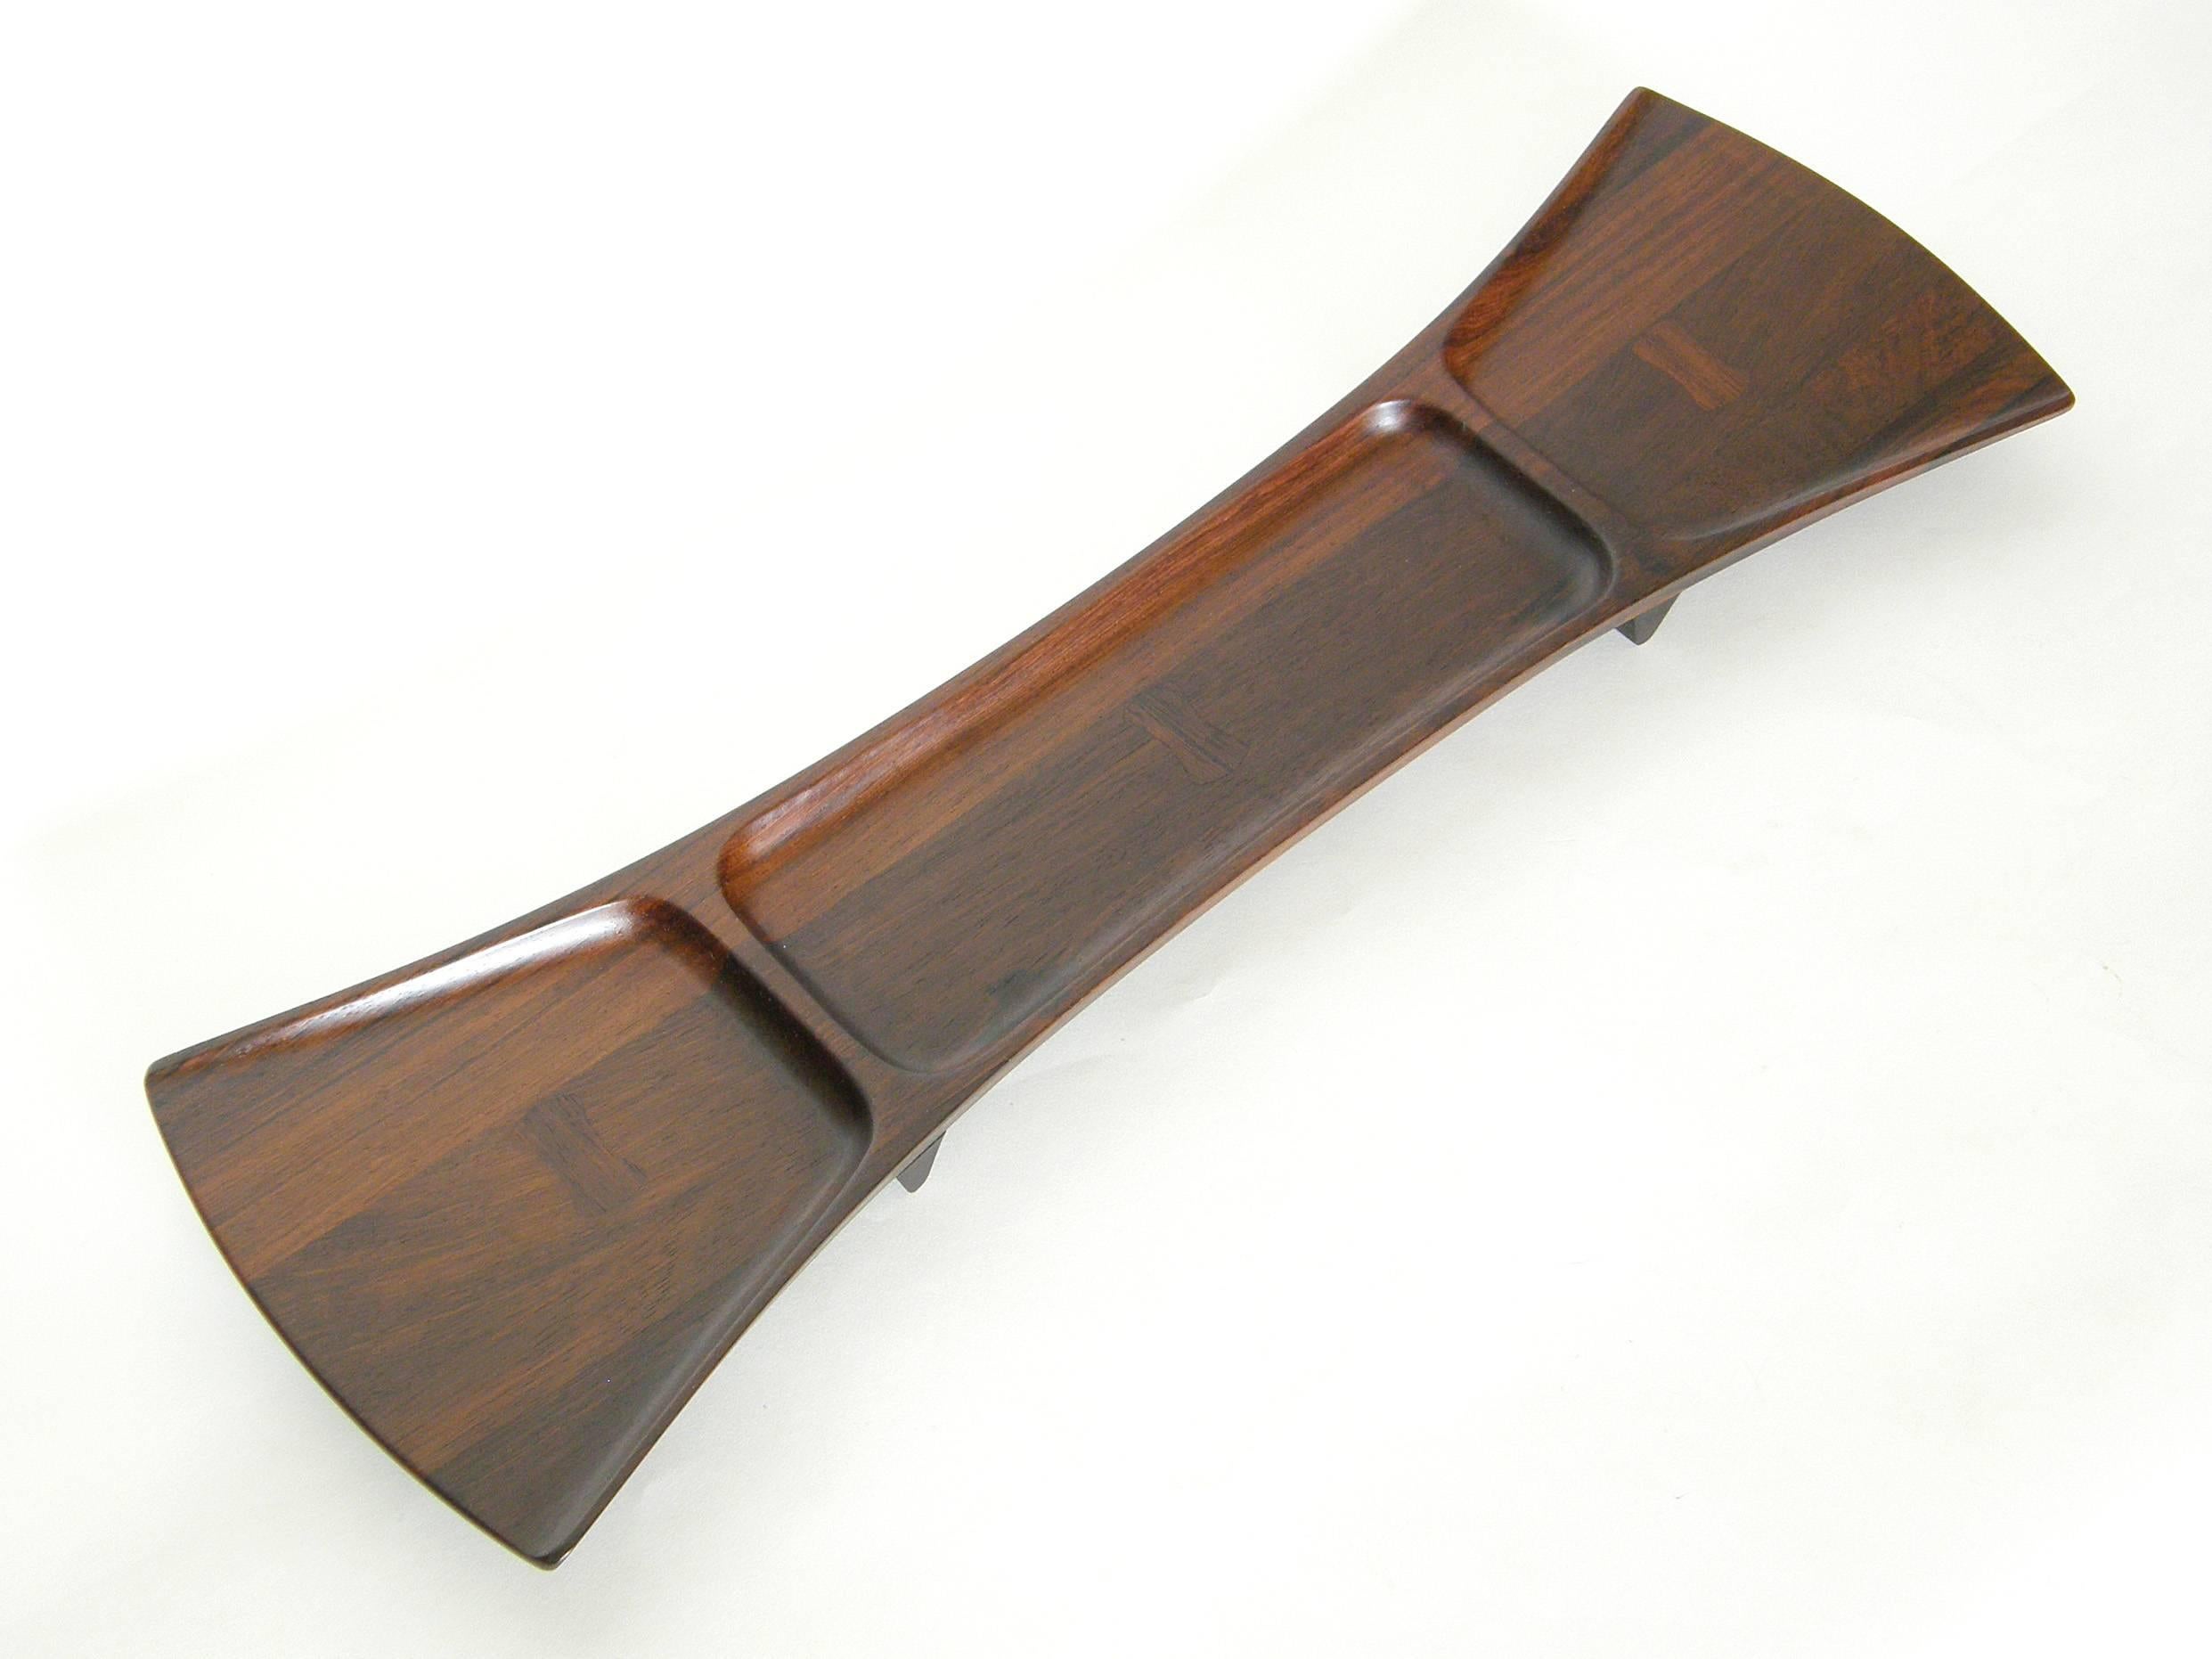 Tripart rosewood tray in the form of an elongated bow tie, designed by Jens Quistgaard for Dansk. The bow tie shape is repeated on the tray as little inlaid pieces running perpendicular to the grain. 

This tray, marked palisander (a type of